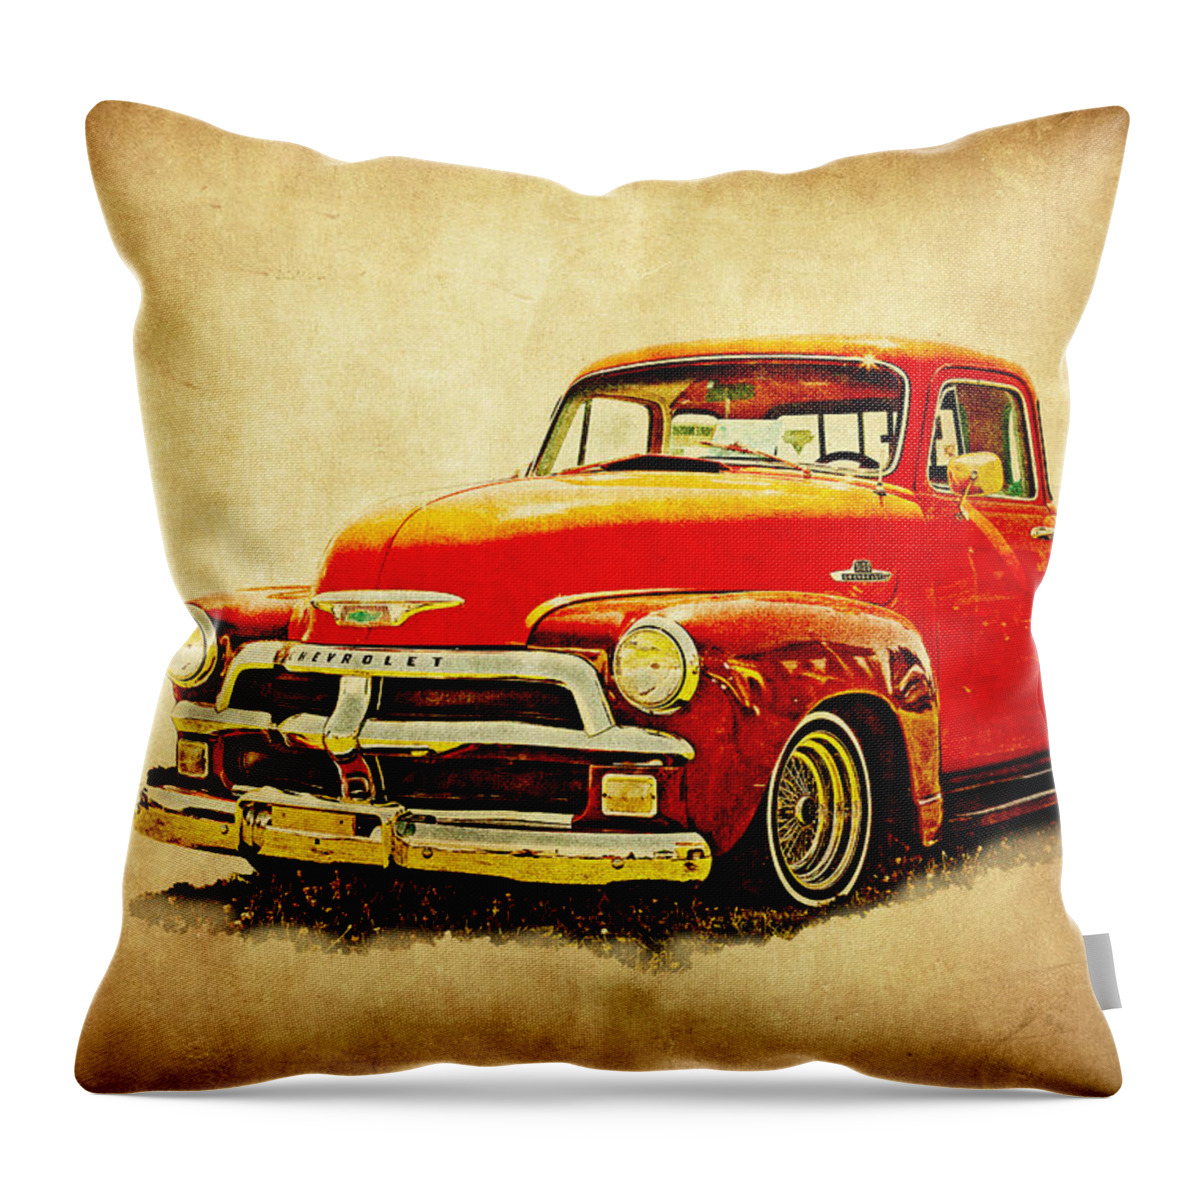 Chevy Pickup Throw Pillow featuring the photograph 1954 Chevy Pickup by Athena Mckinzie